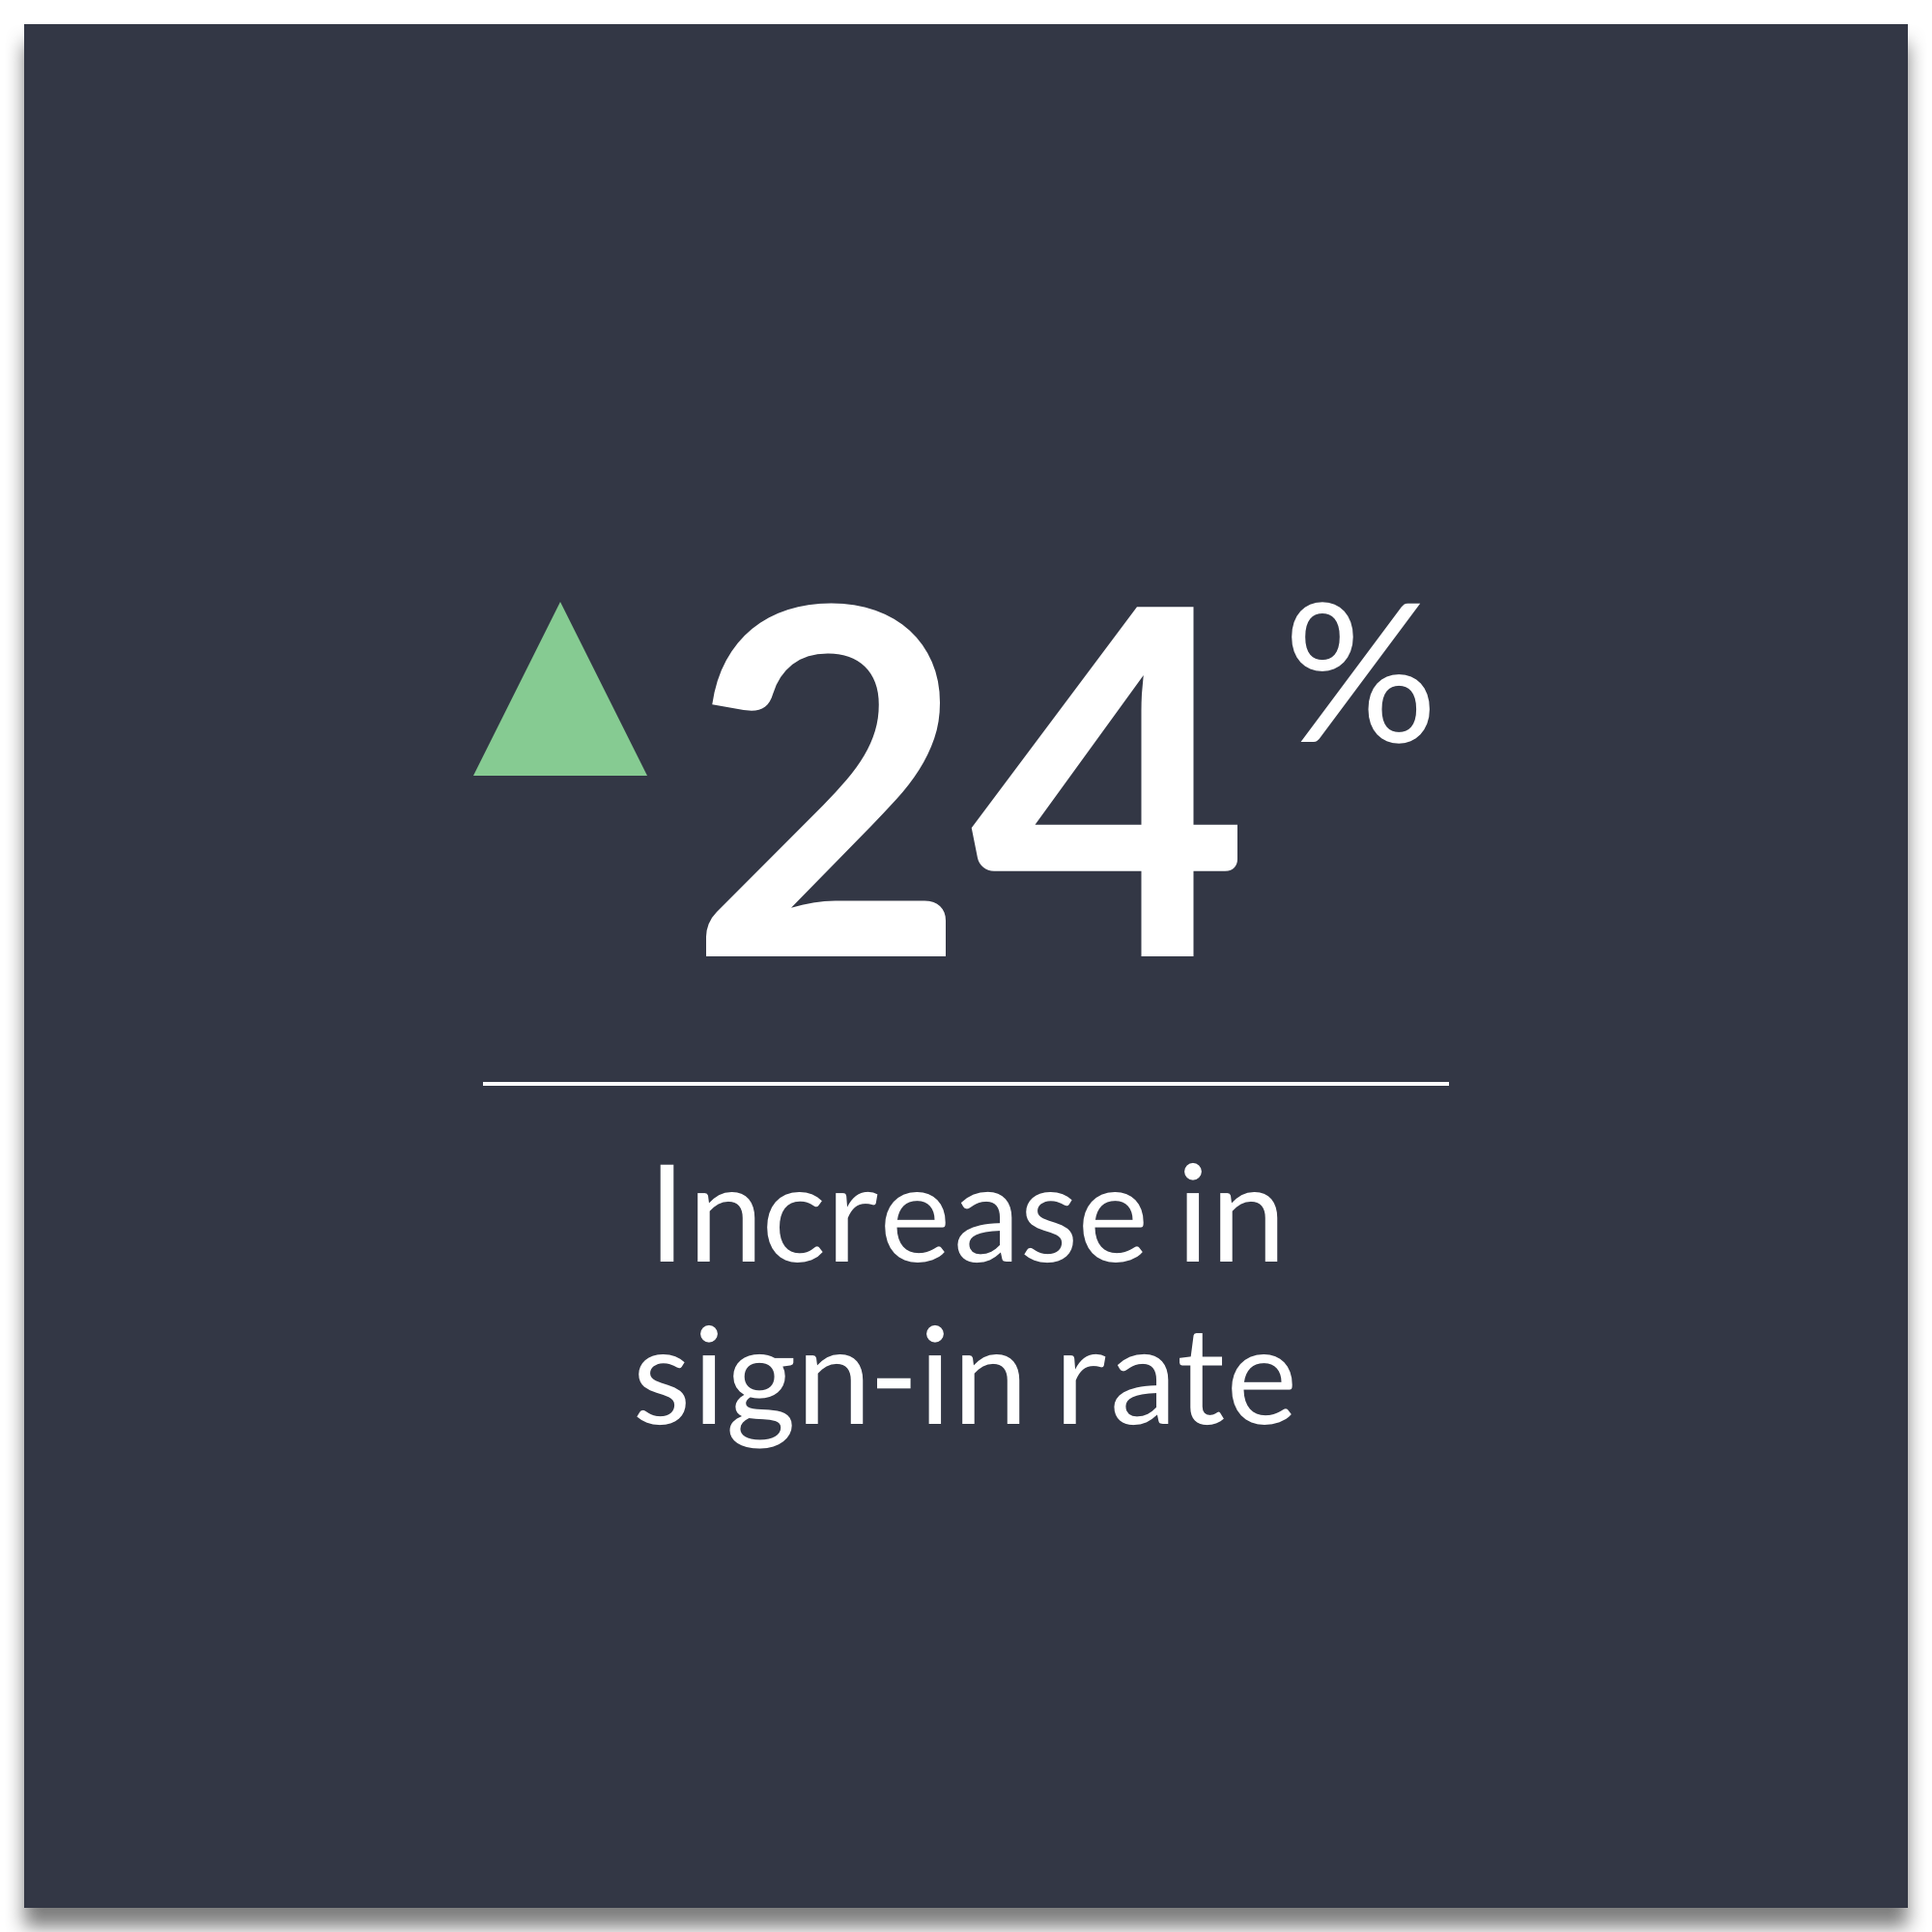 Sign-in rate metric